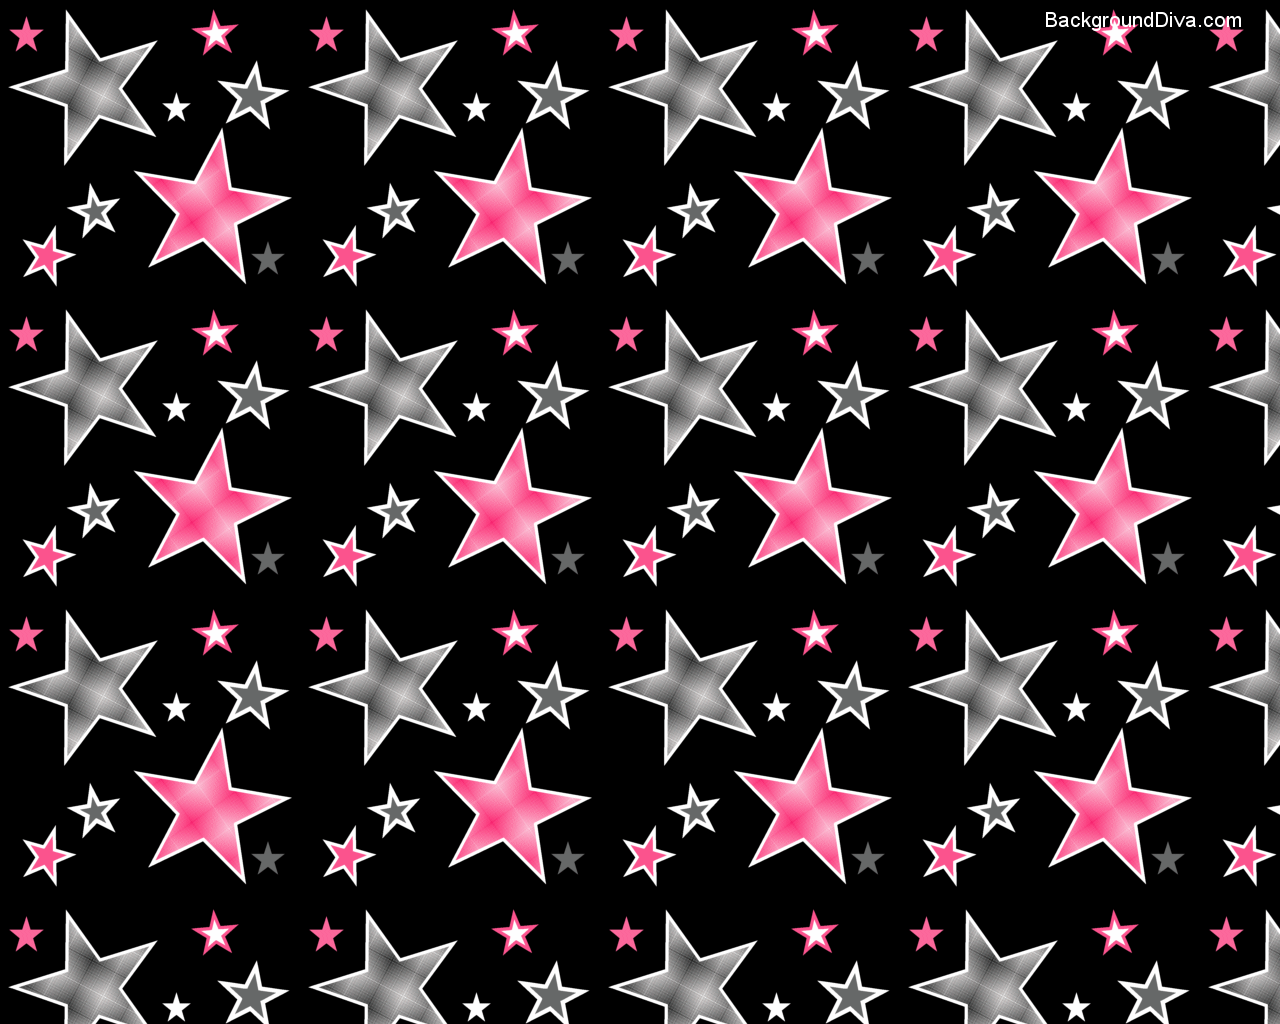 Black and Pink Wallpaper Free Black and Pink Background